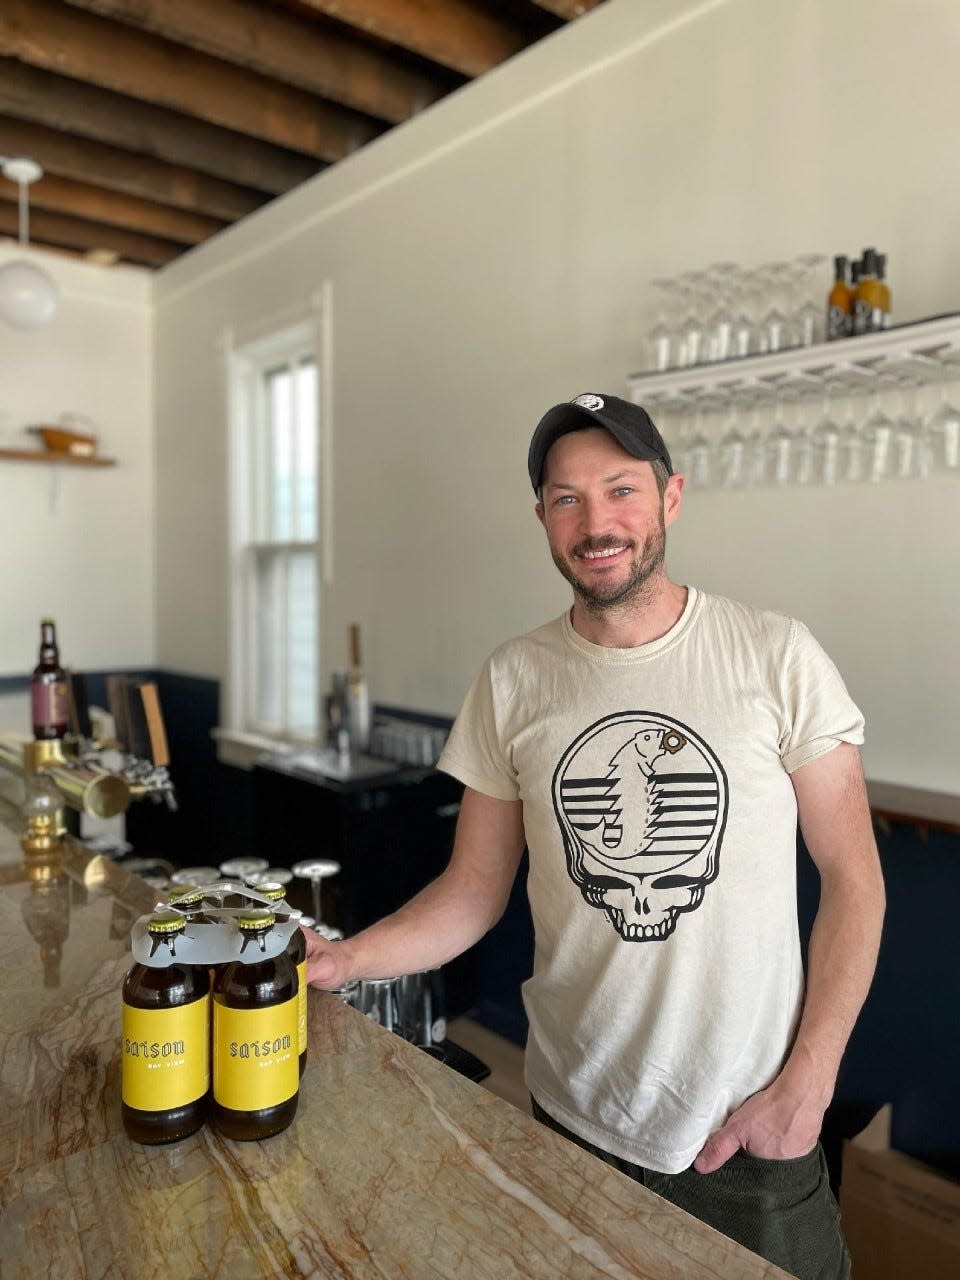 Rob Brennan, who owns Supermoon brewery with his wife, Maria Keegan, stands behind the bar in the century-old building that once held a general store. Saison (shown) is one of the beers he makes.